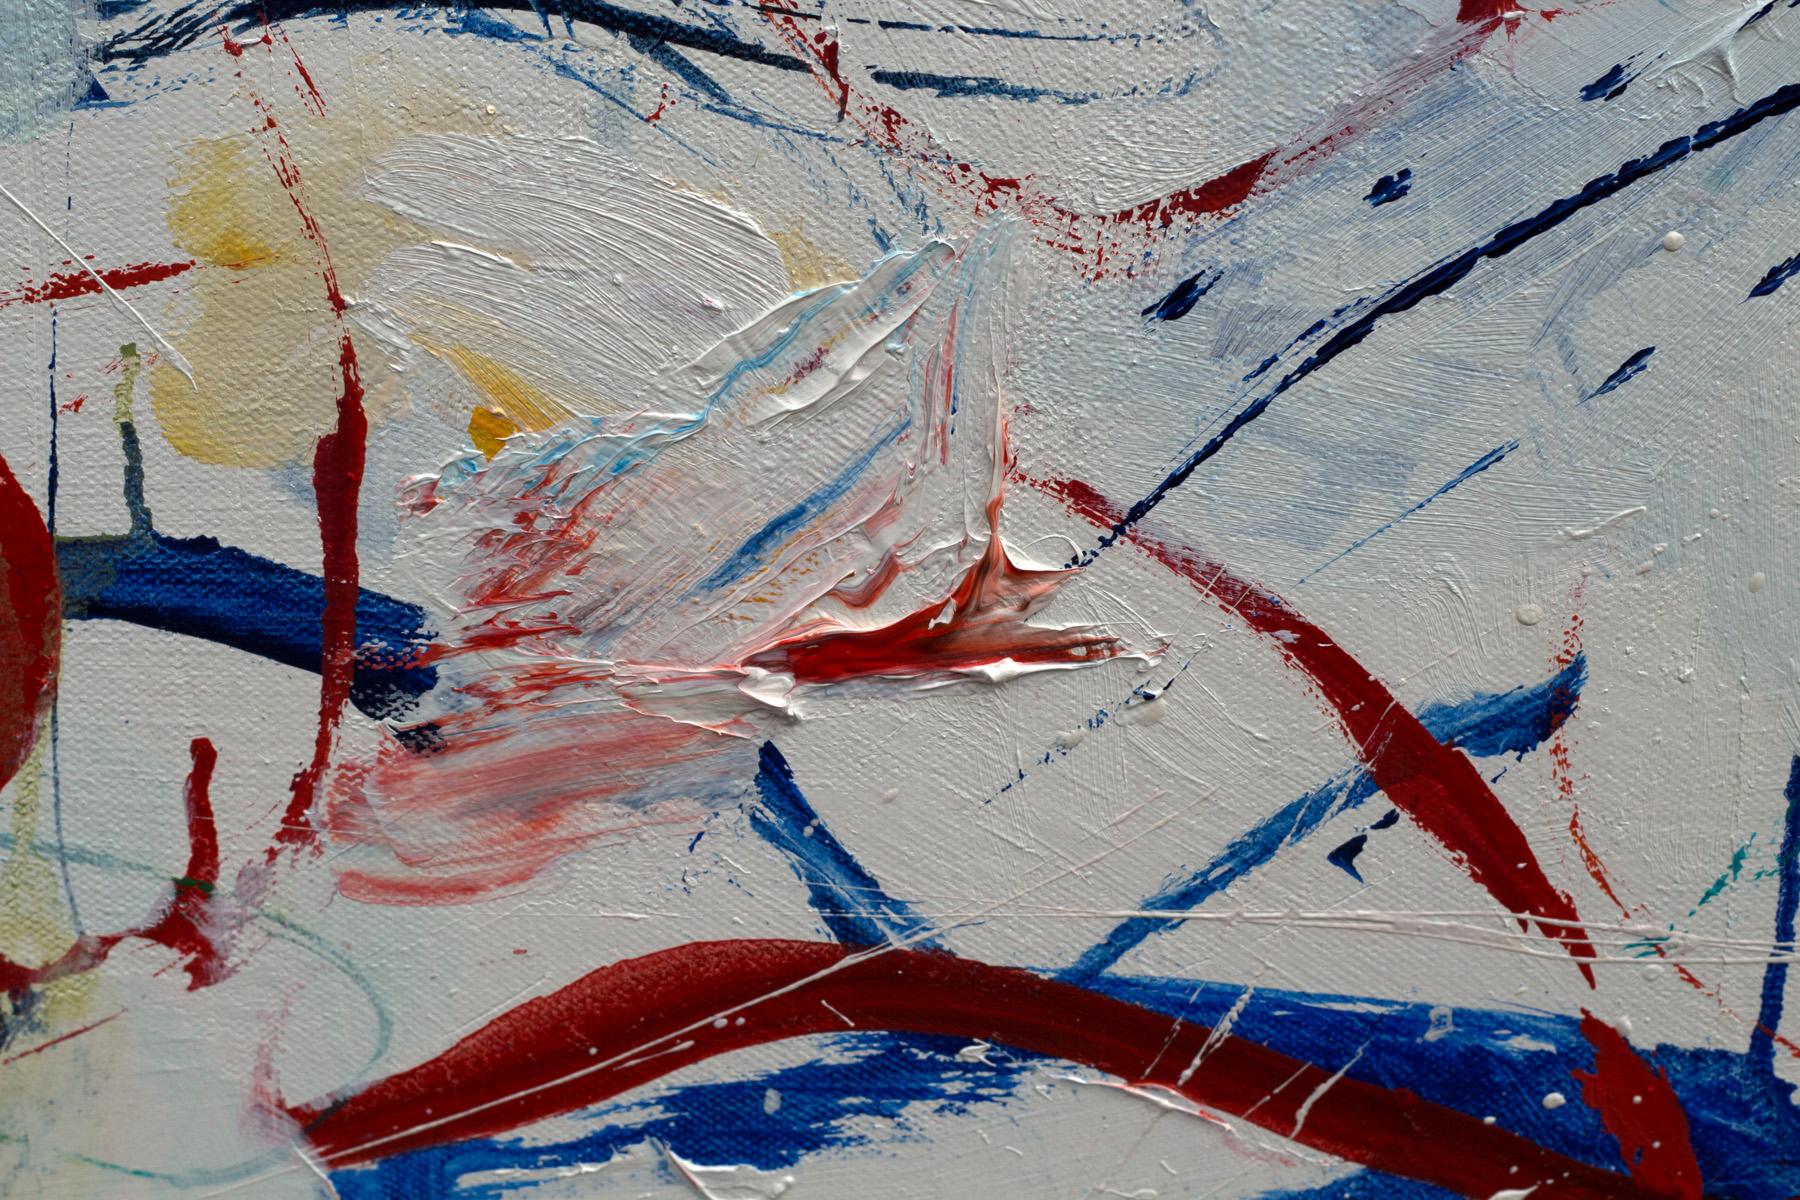 Katherine Borkowski-Byrne’s “Entanglements” is a colorful abstract 36 x 42 x 1.5 inch oil painting on canvas with very thick spontaneous brushwork in saturated red, blues and yellows on a white background. This emotionally raw and expressionist